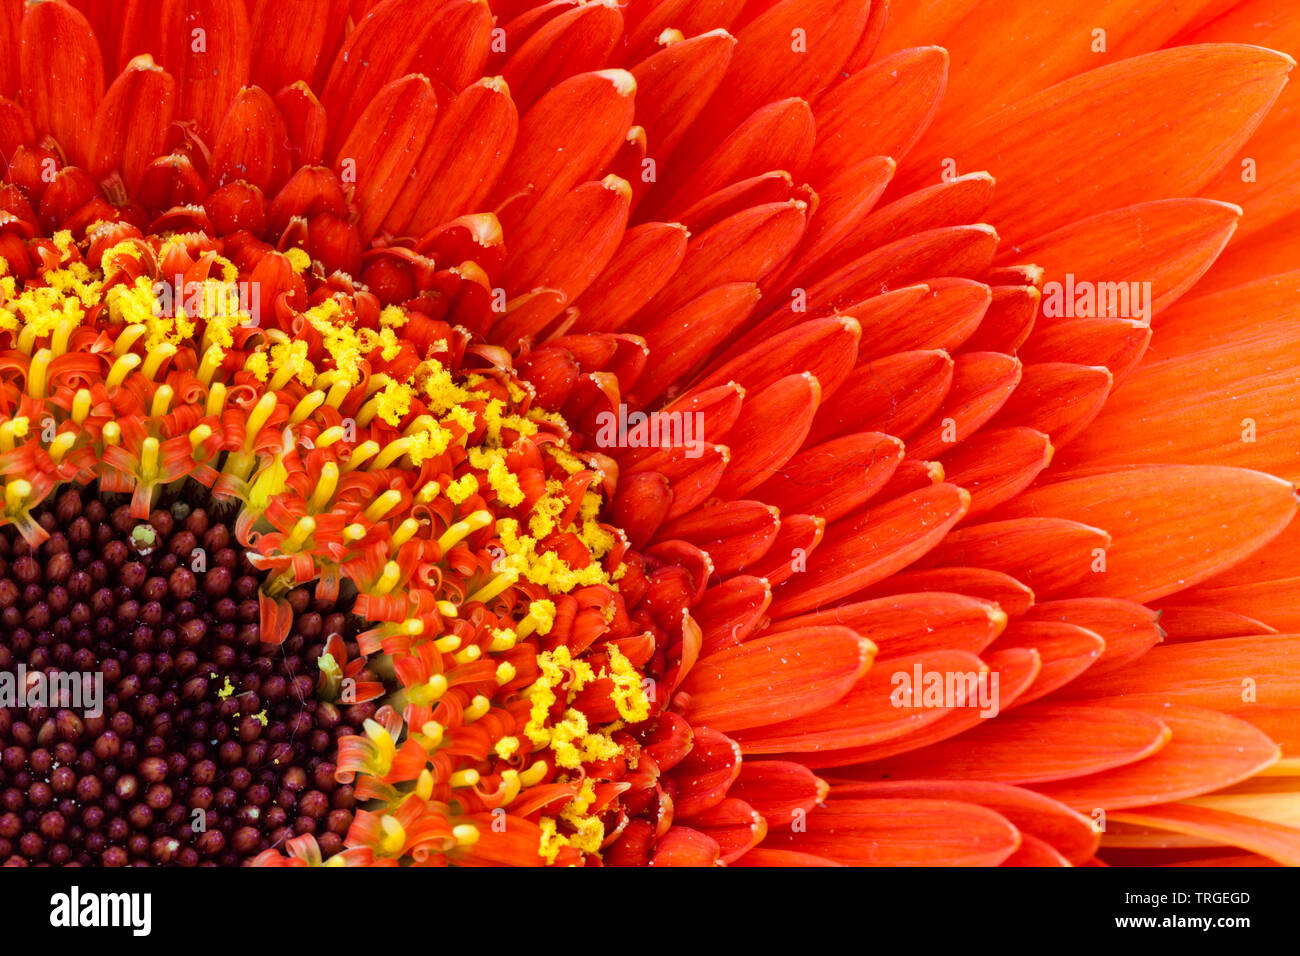 Macro image of a red flower with yellow details around a darker centre Stock Photo